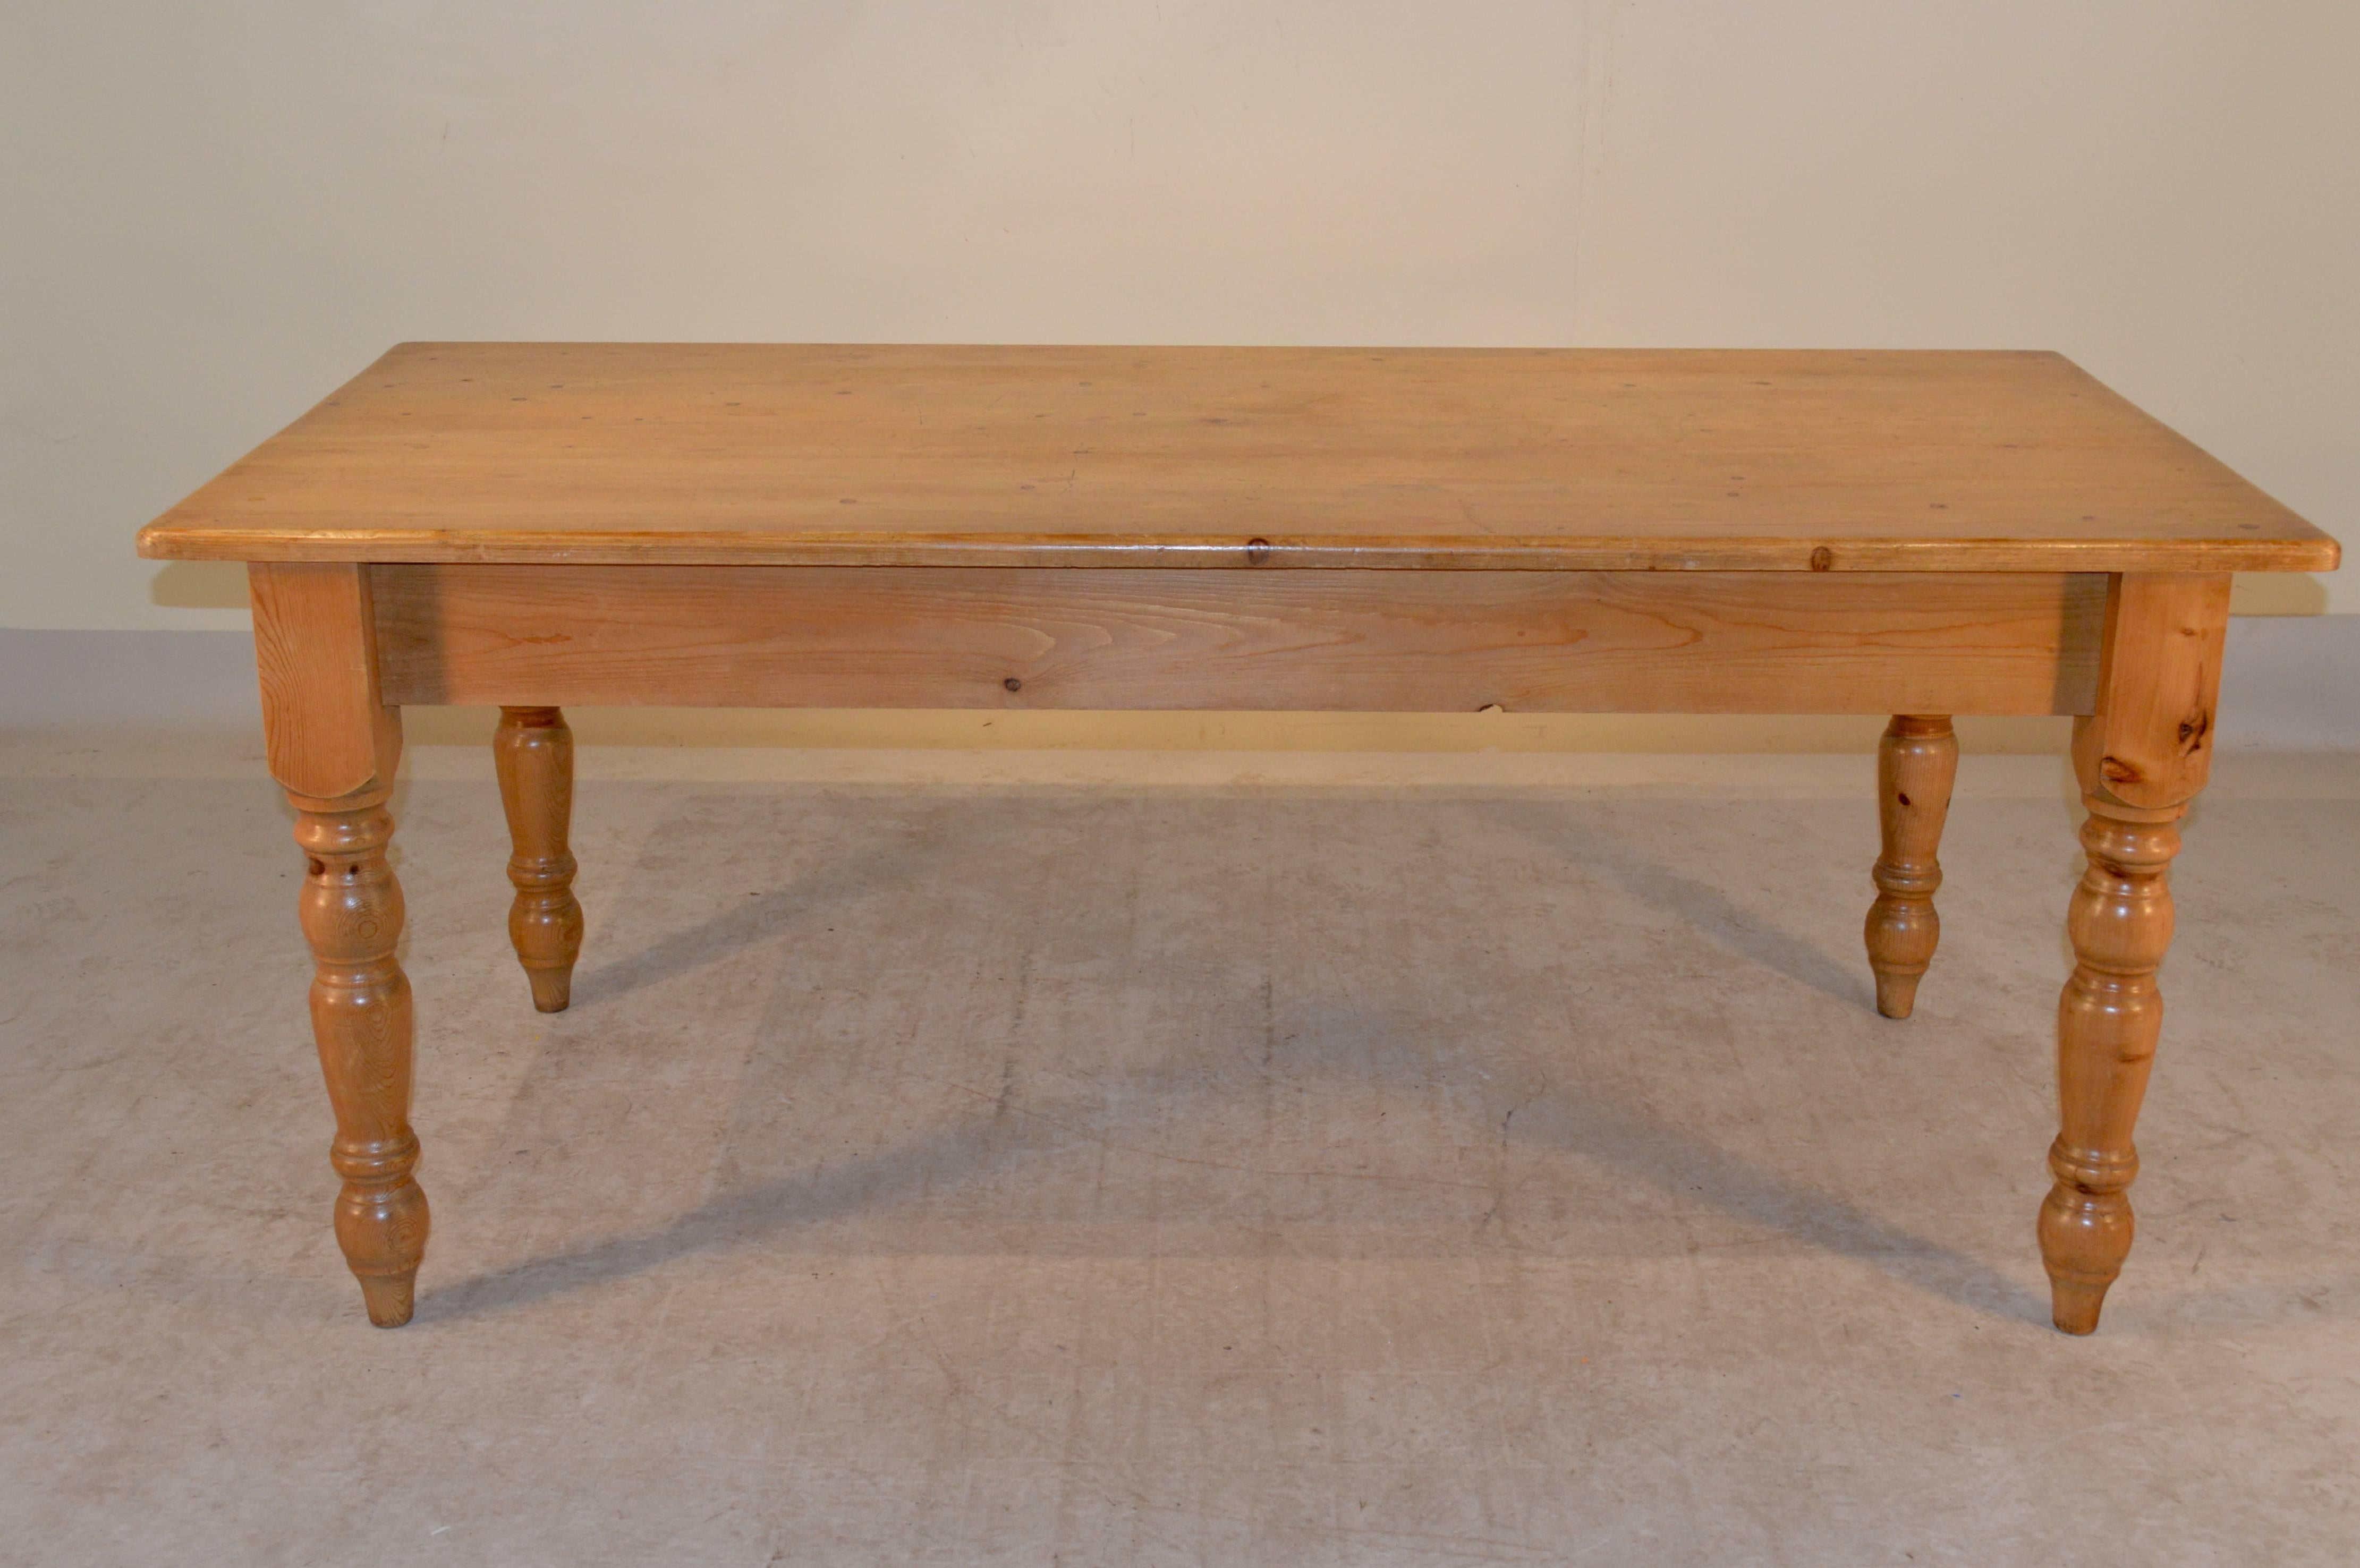 English farm table made from pine with a plank top following down to a simple apron and raised on lovely hand-turned legs, circa 1950. The apron measures 23.5